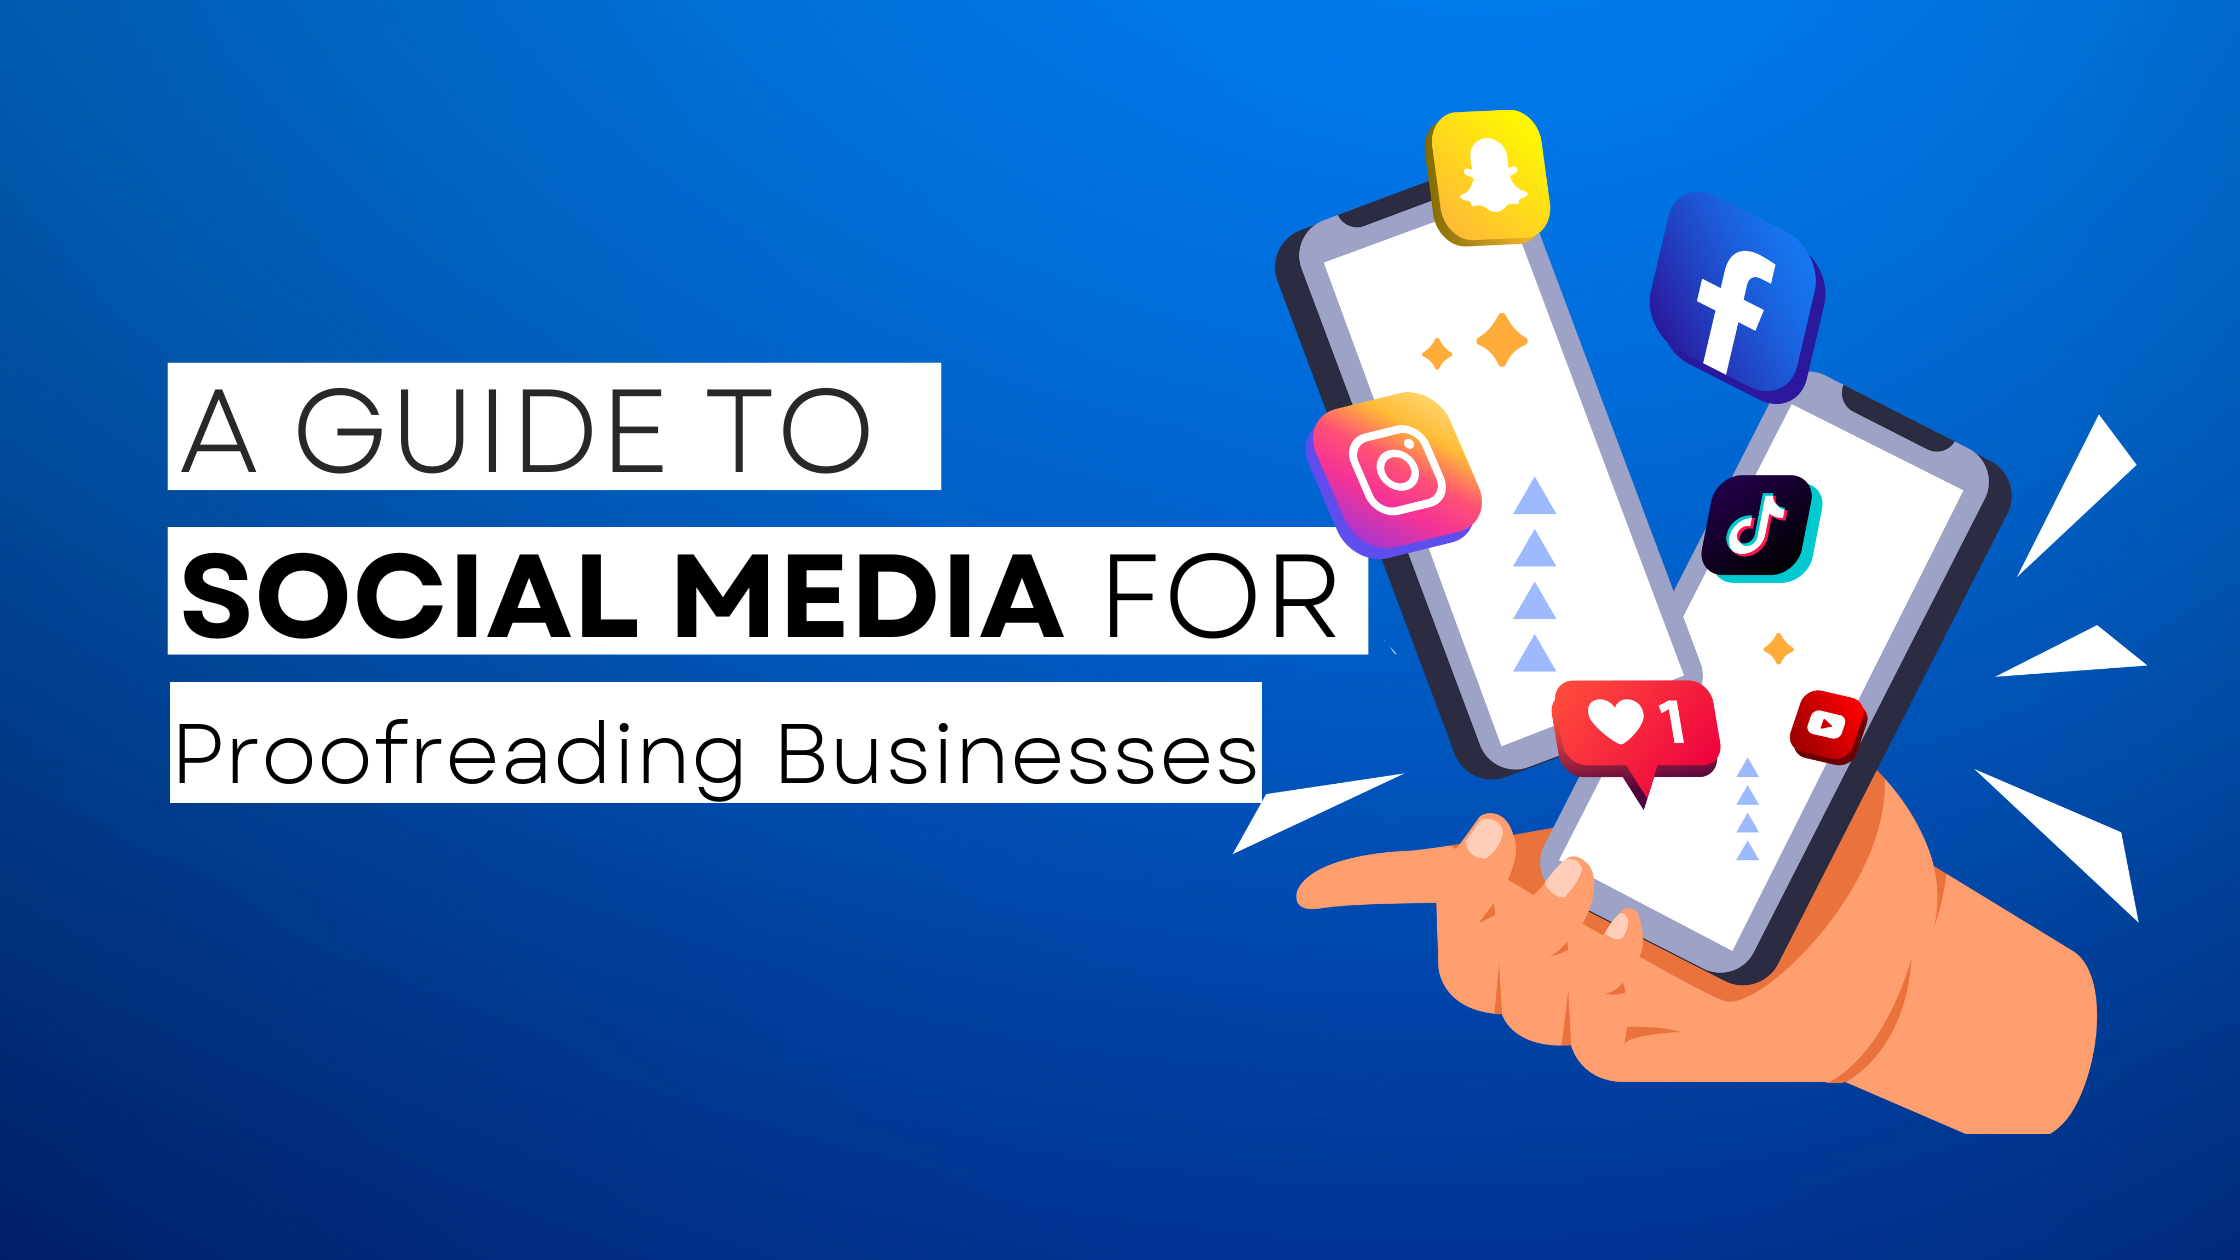 How to start Proofreading  on social media